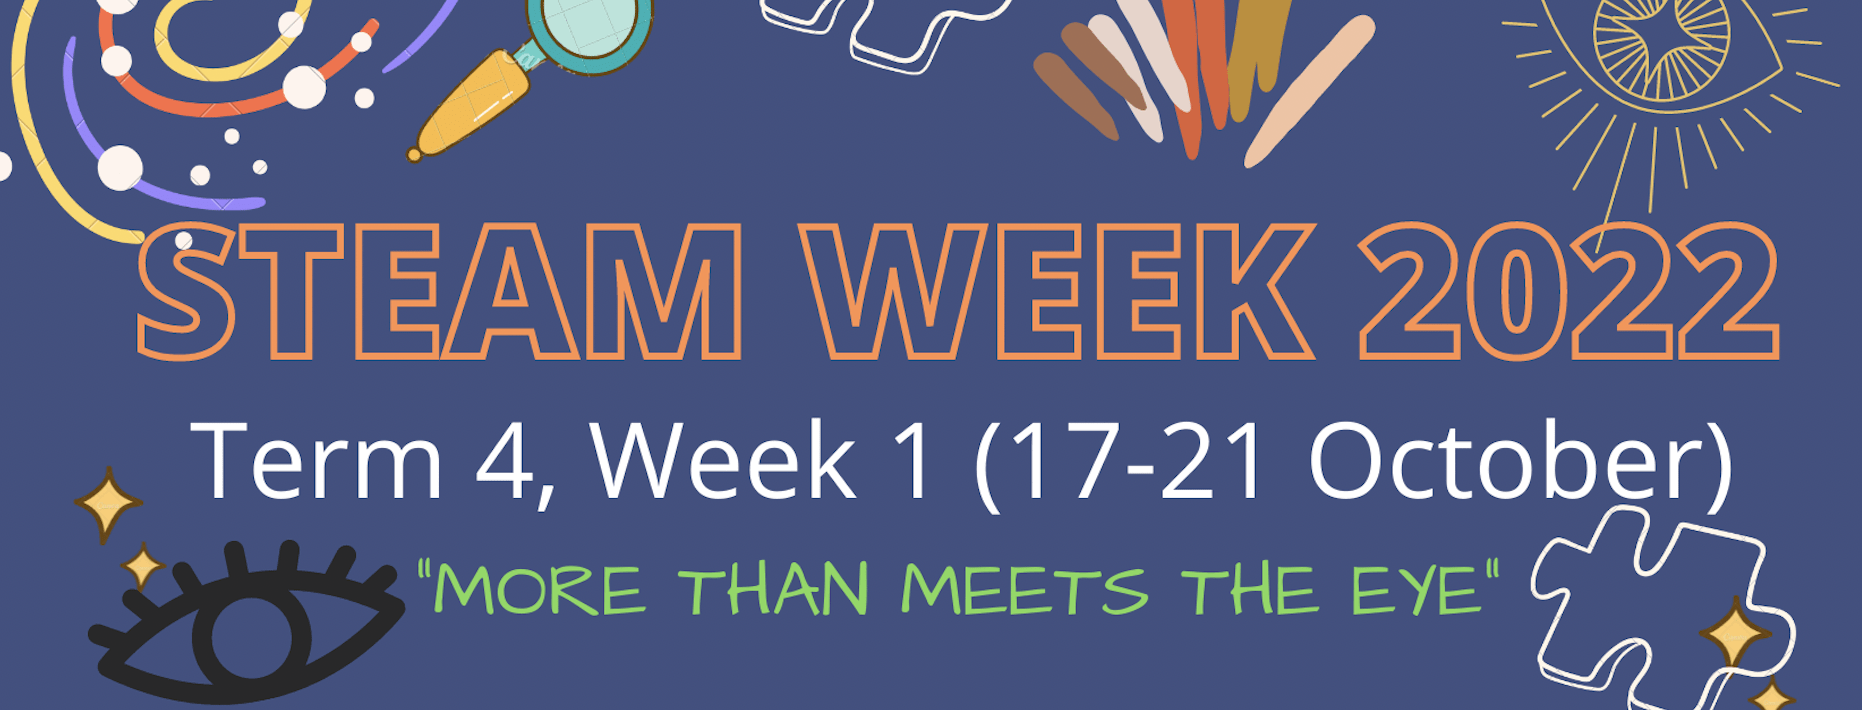 Everything you need to know about STEAM Week 2022!